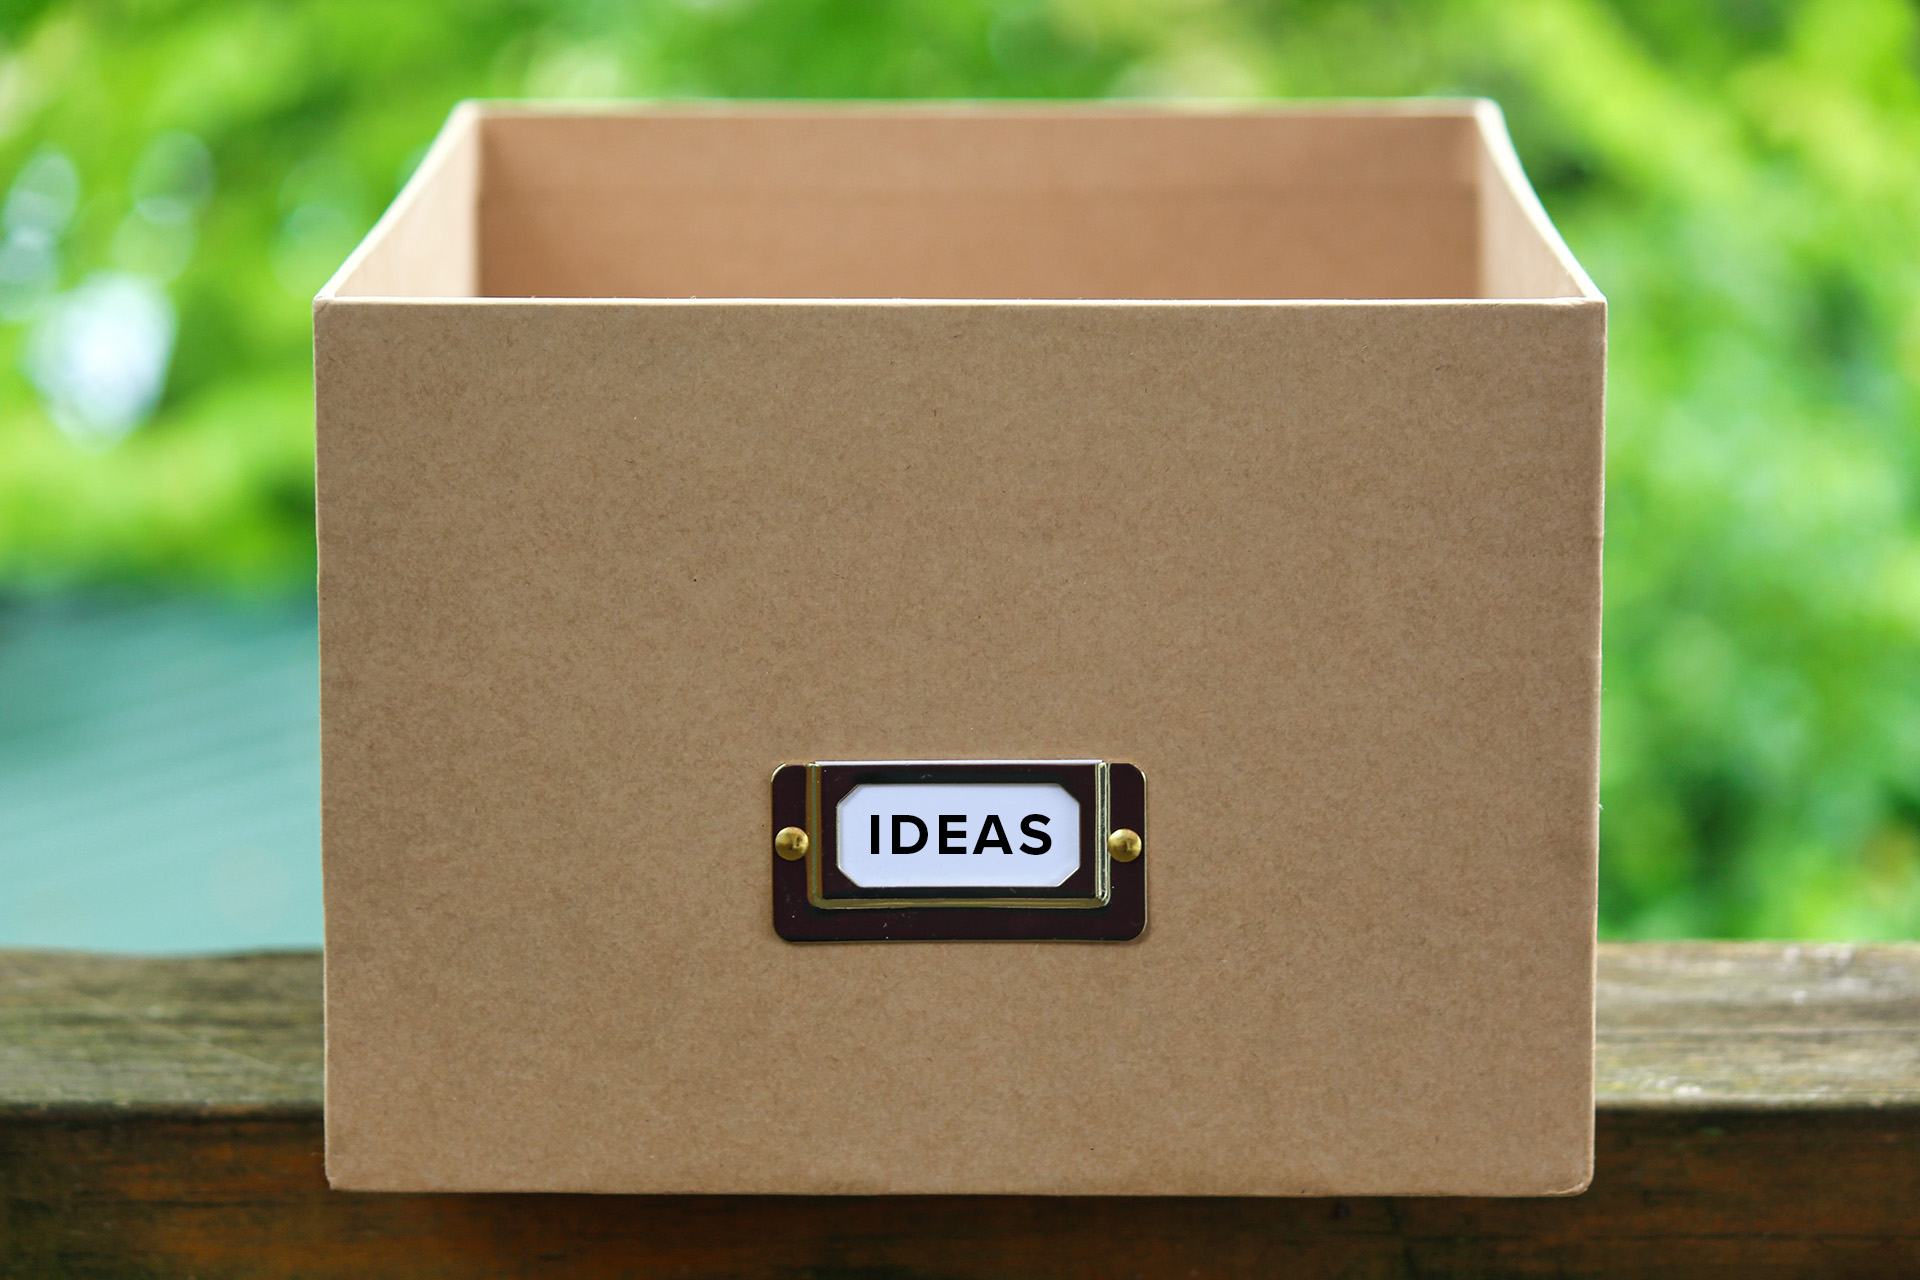 idea box on a wooden table with greenery in the background